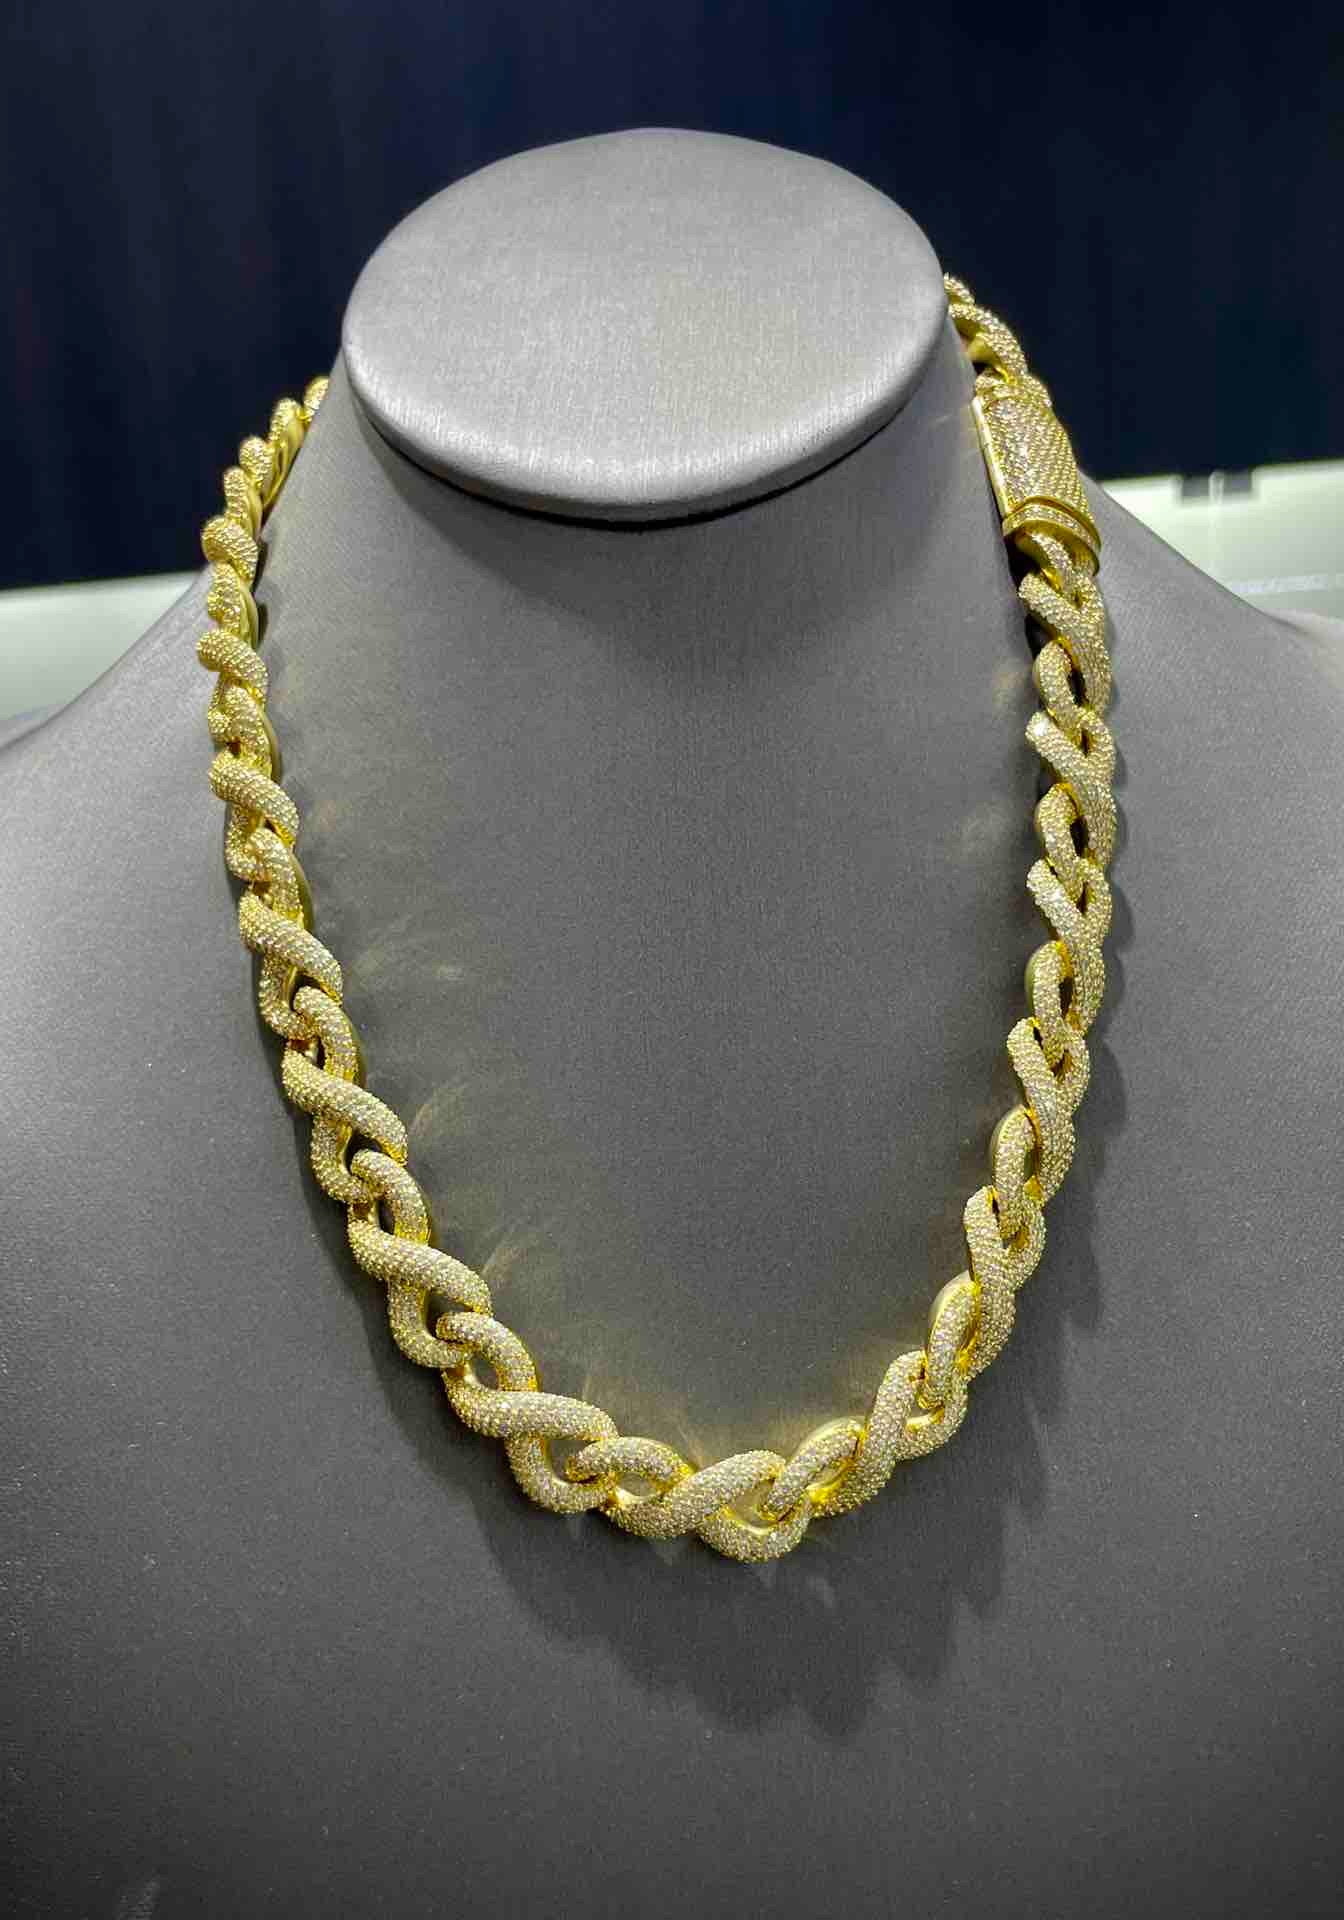 VVS1 "ICED Bust Down" 14k Infinity Link Migos Chain yellow gold